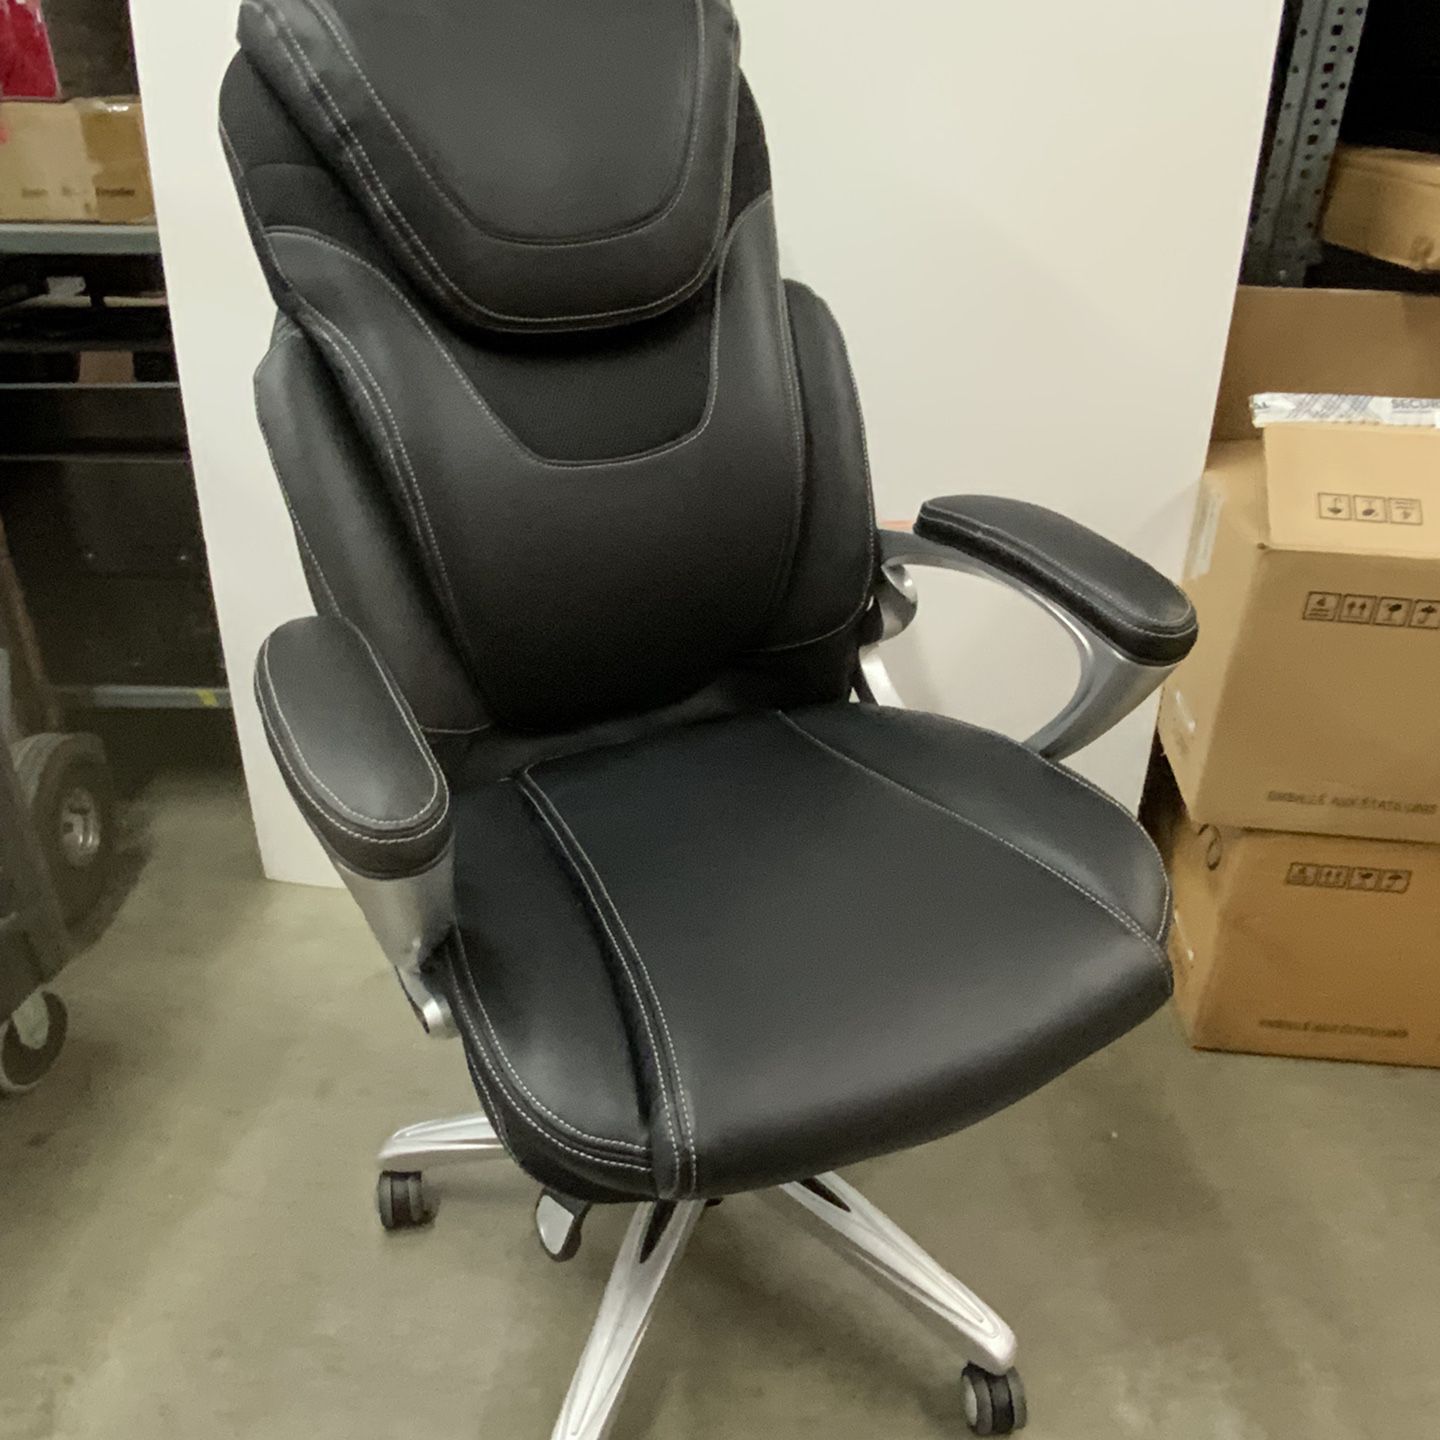 Serta - Bryce Bonded Leather Executive Office Chair - Black # 639